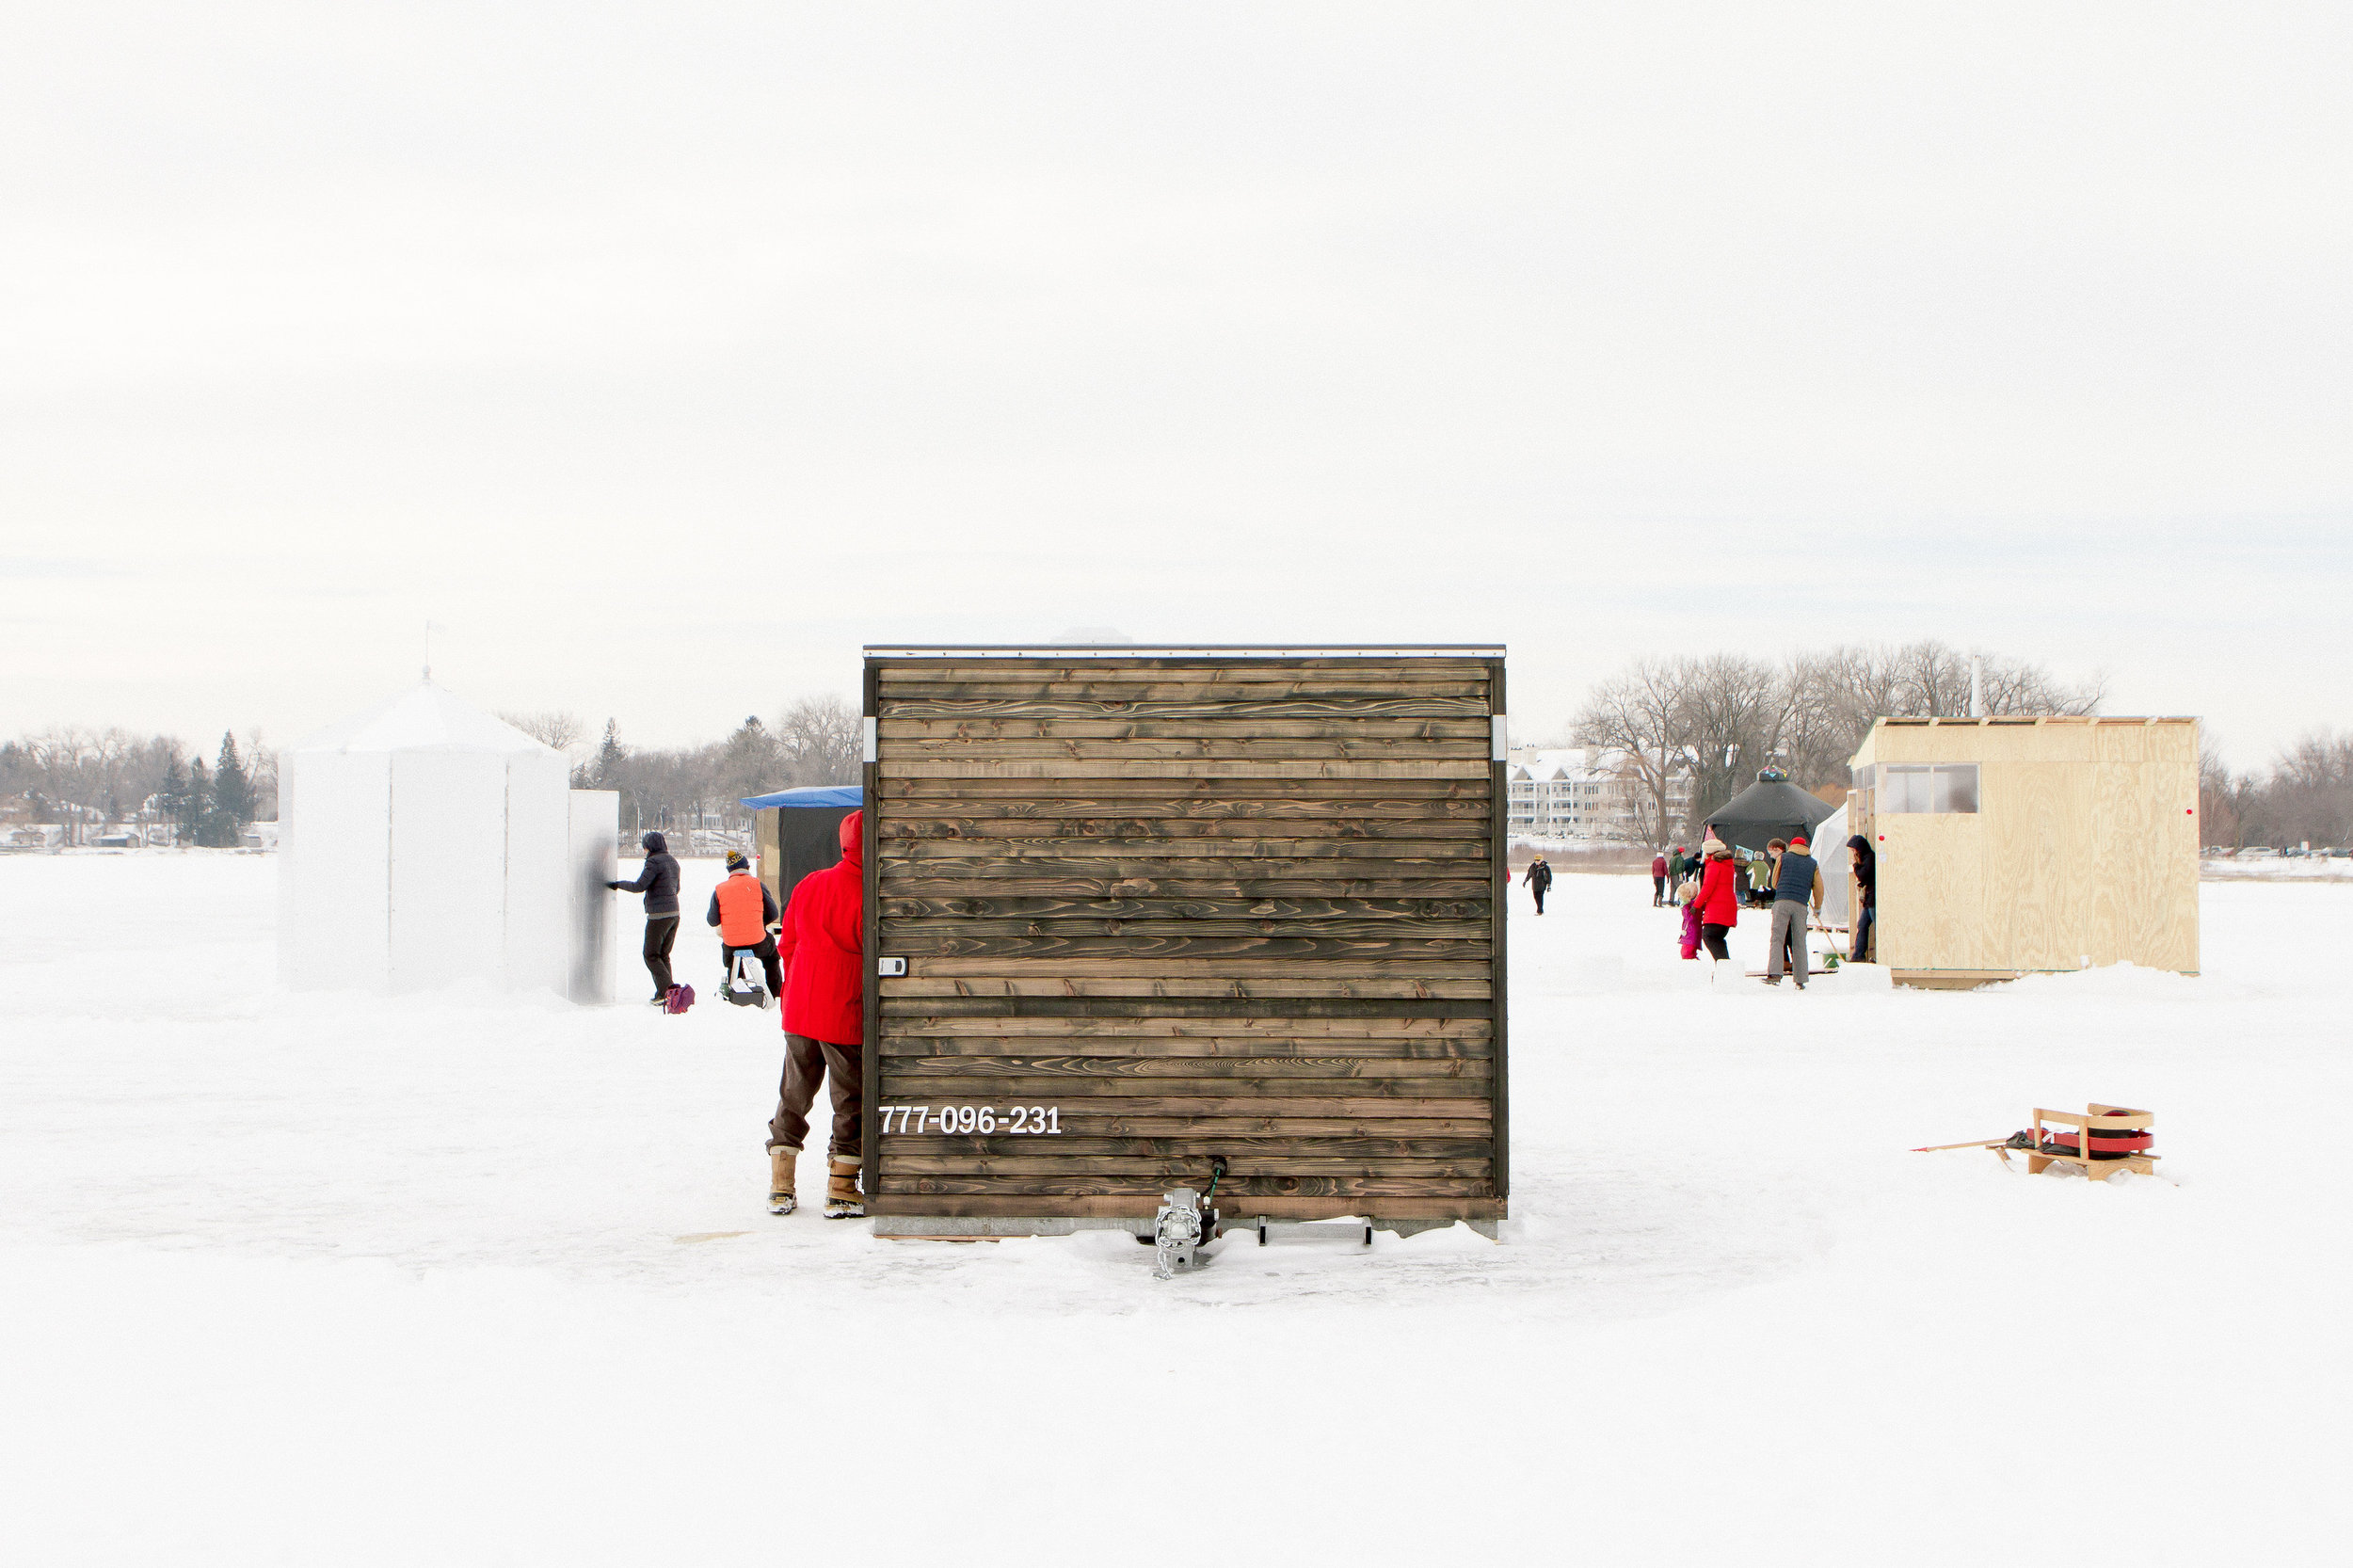 NewStudio Architecture designed its art shanty on skids to be portable